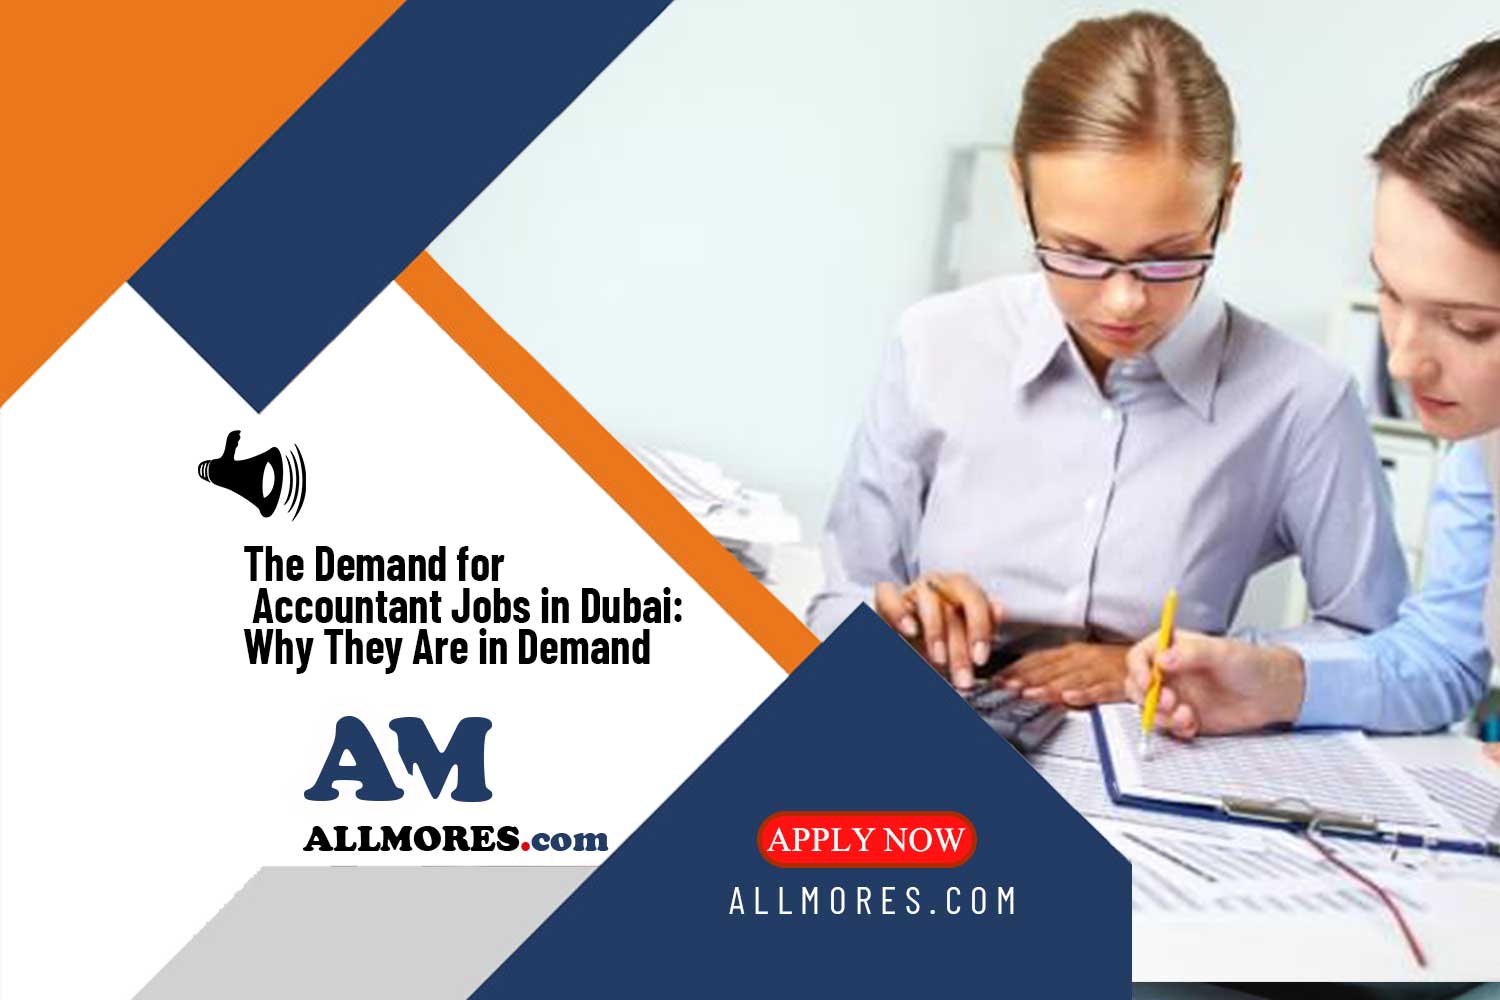 The Demand for Accountant Jobs in Dubai: Why They Are in Demand